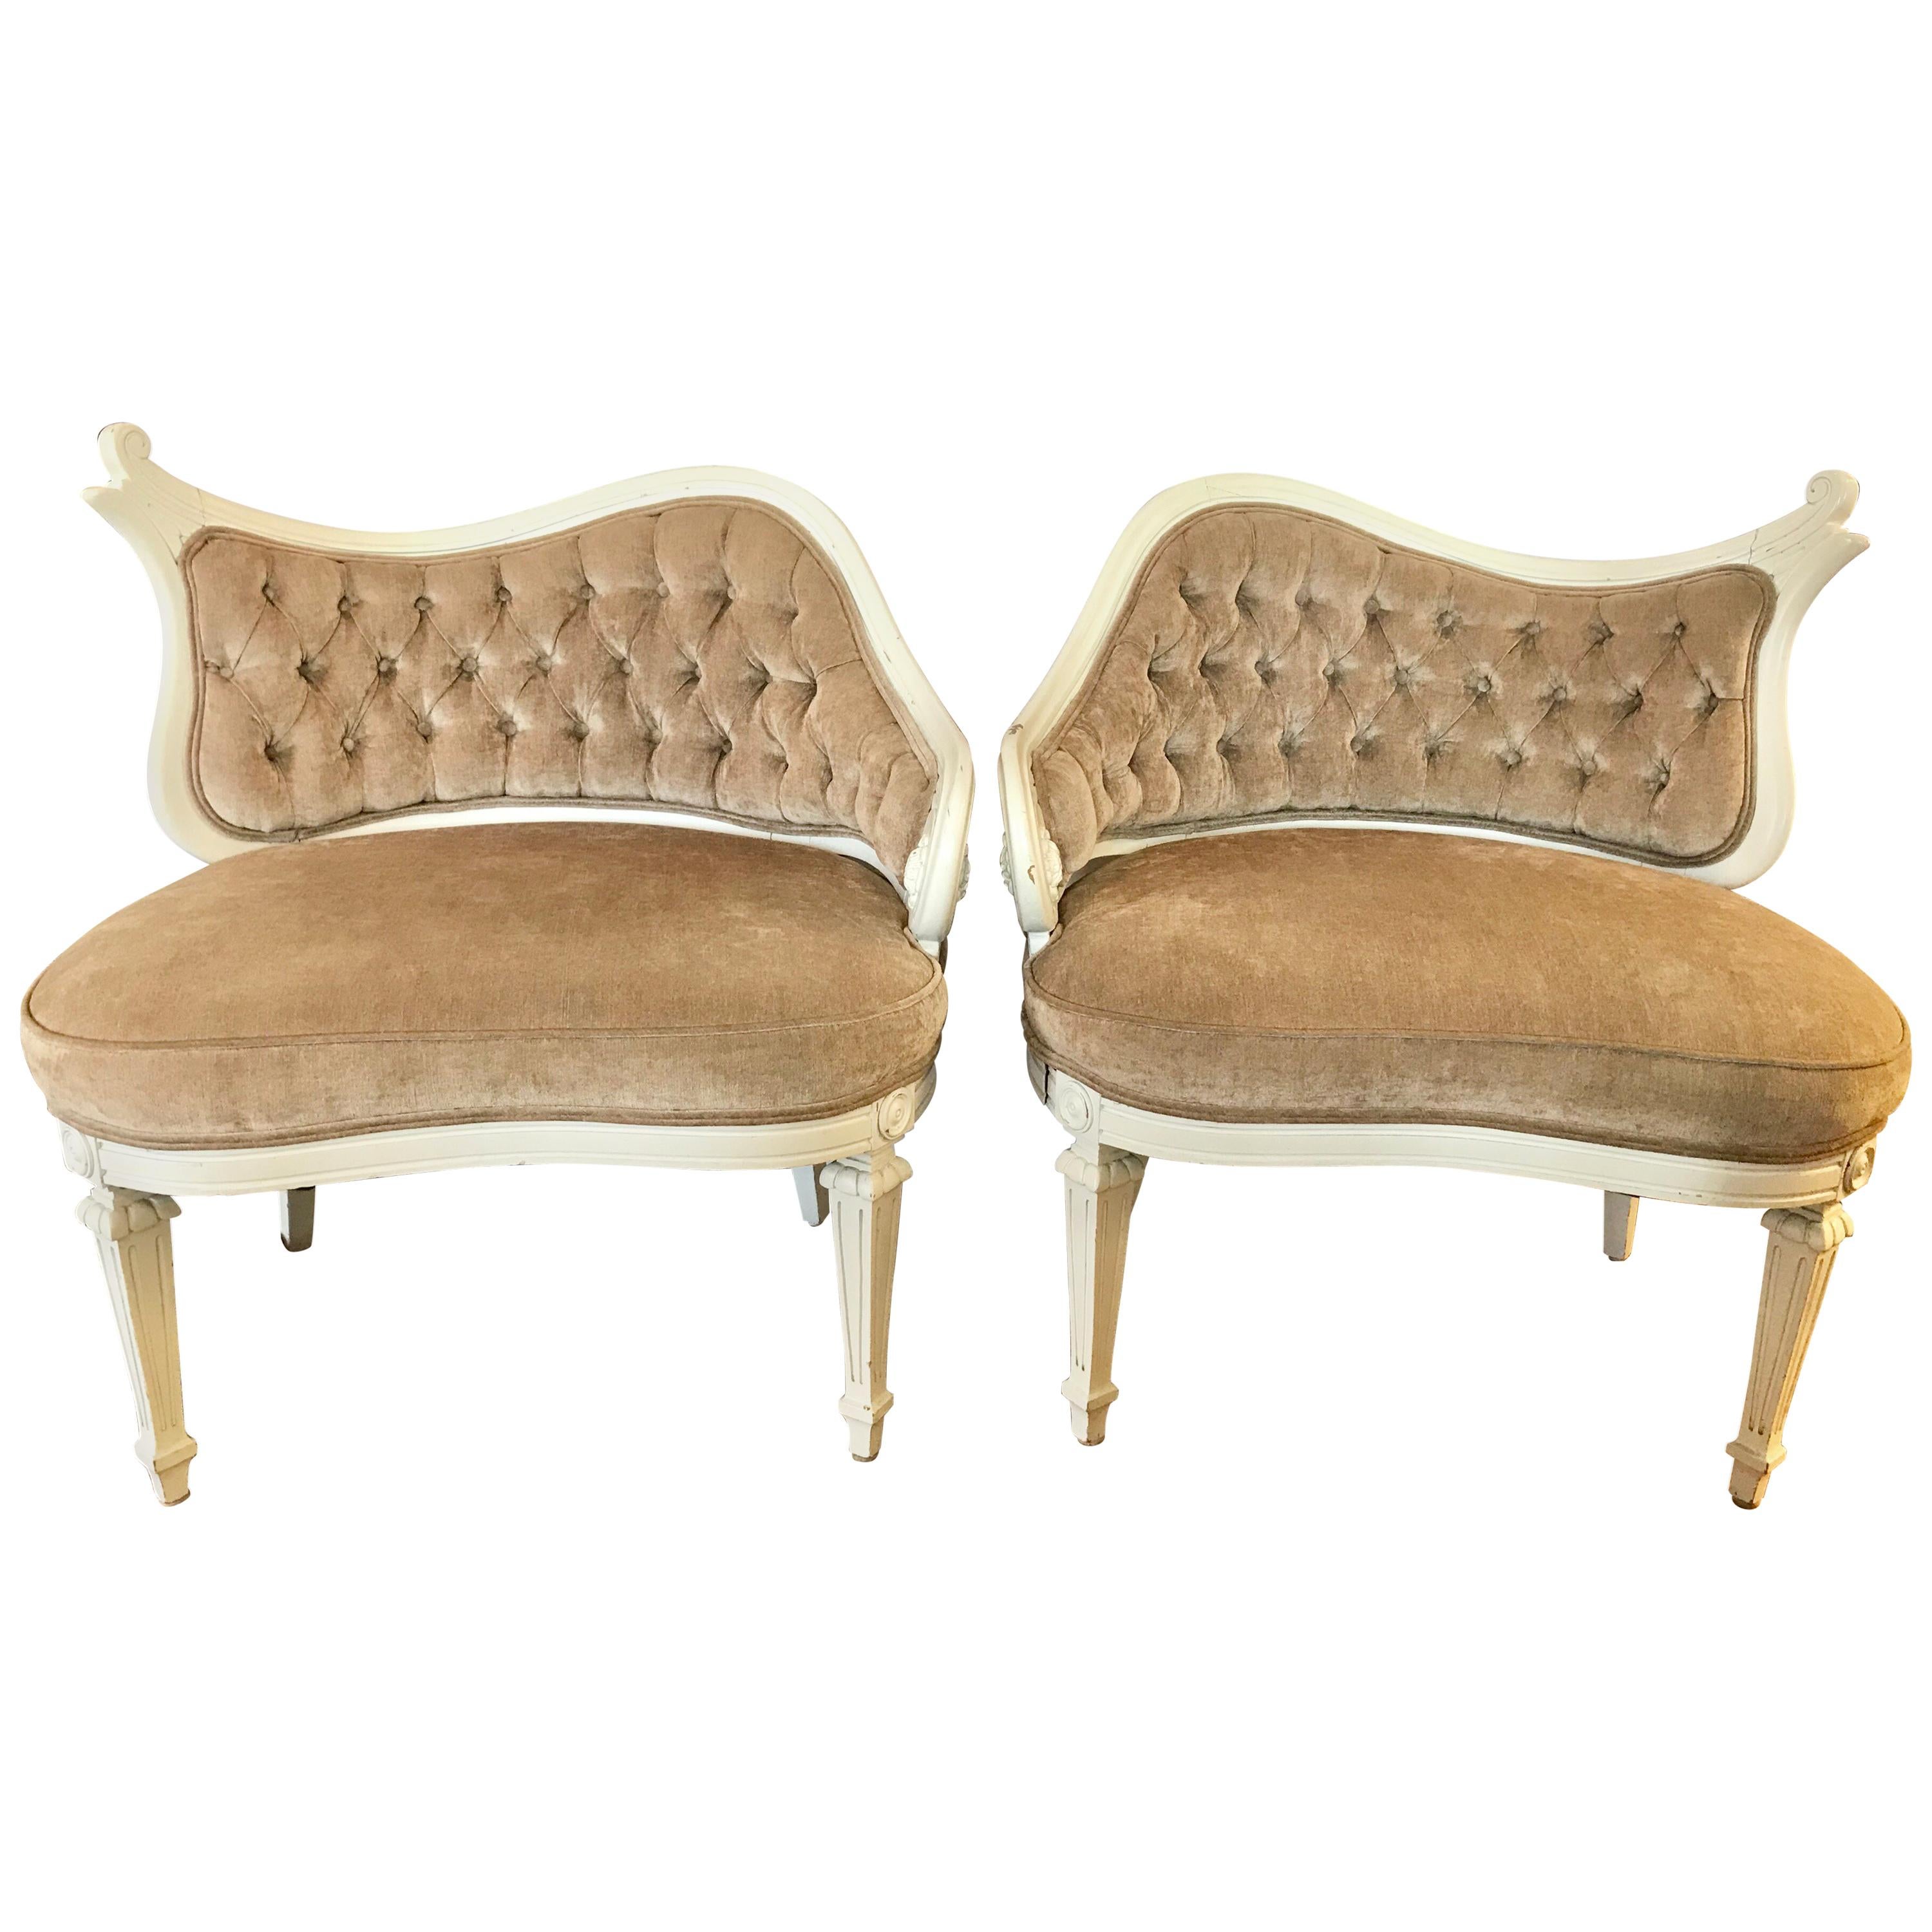 Pair of French Antique Shaped Tufted Velvet Chairs